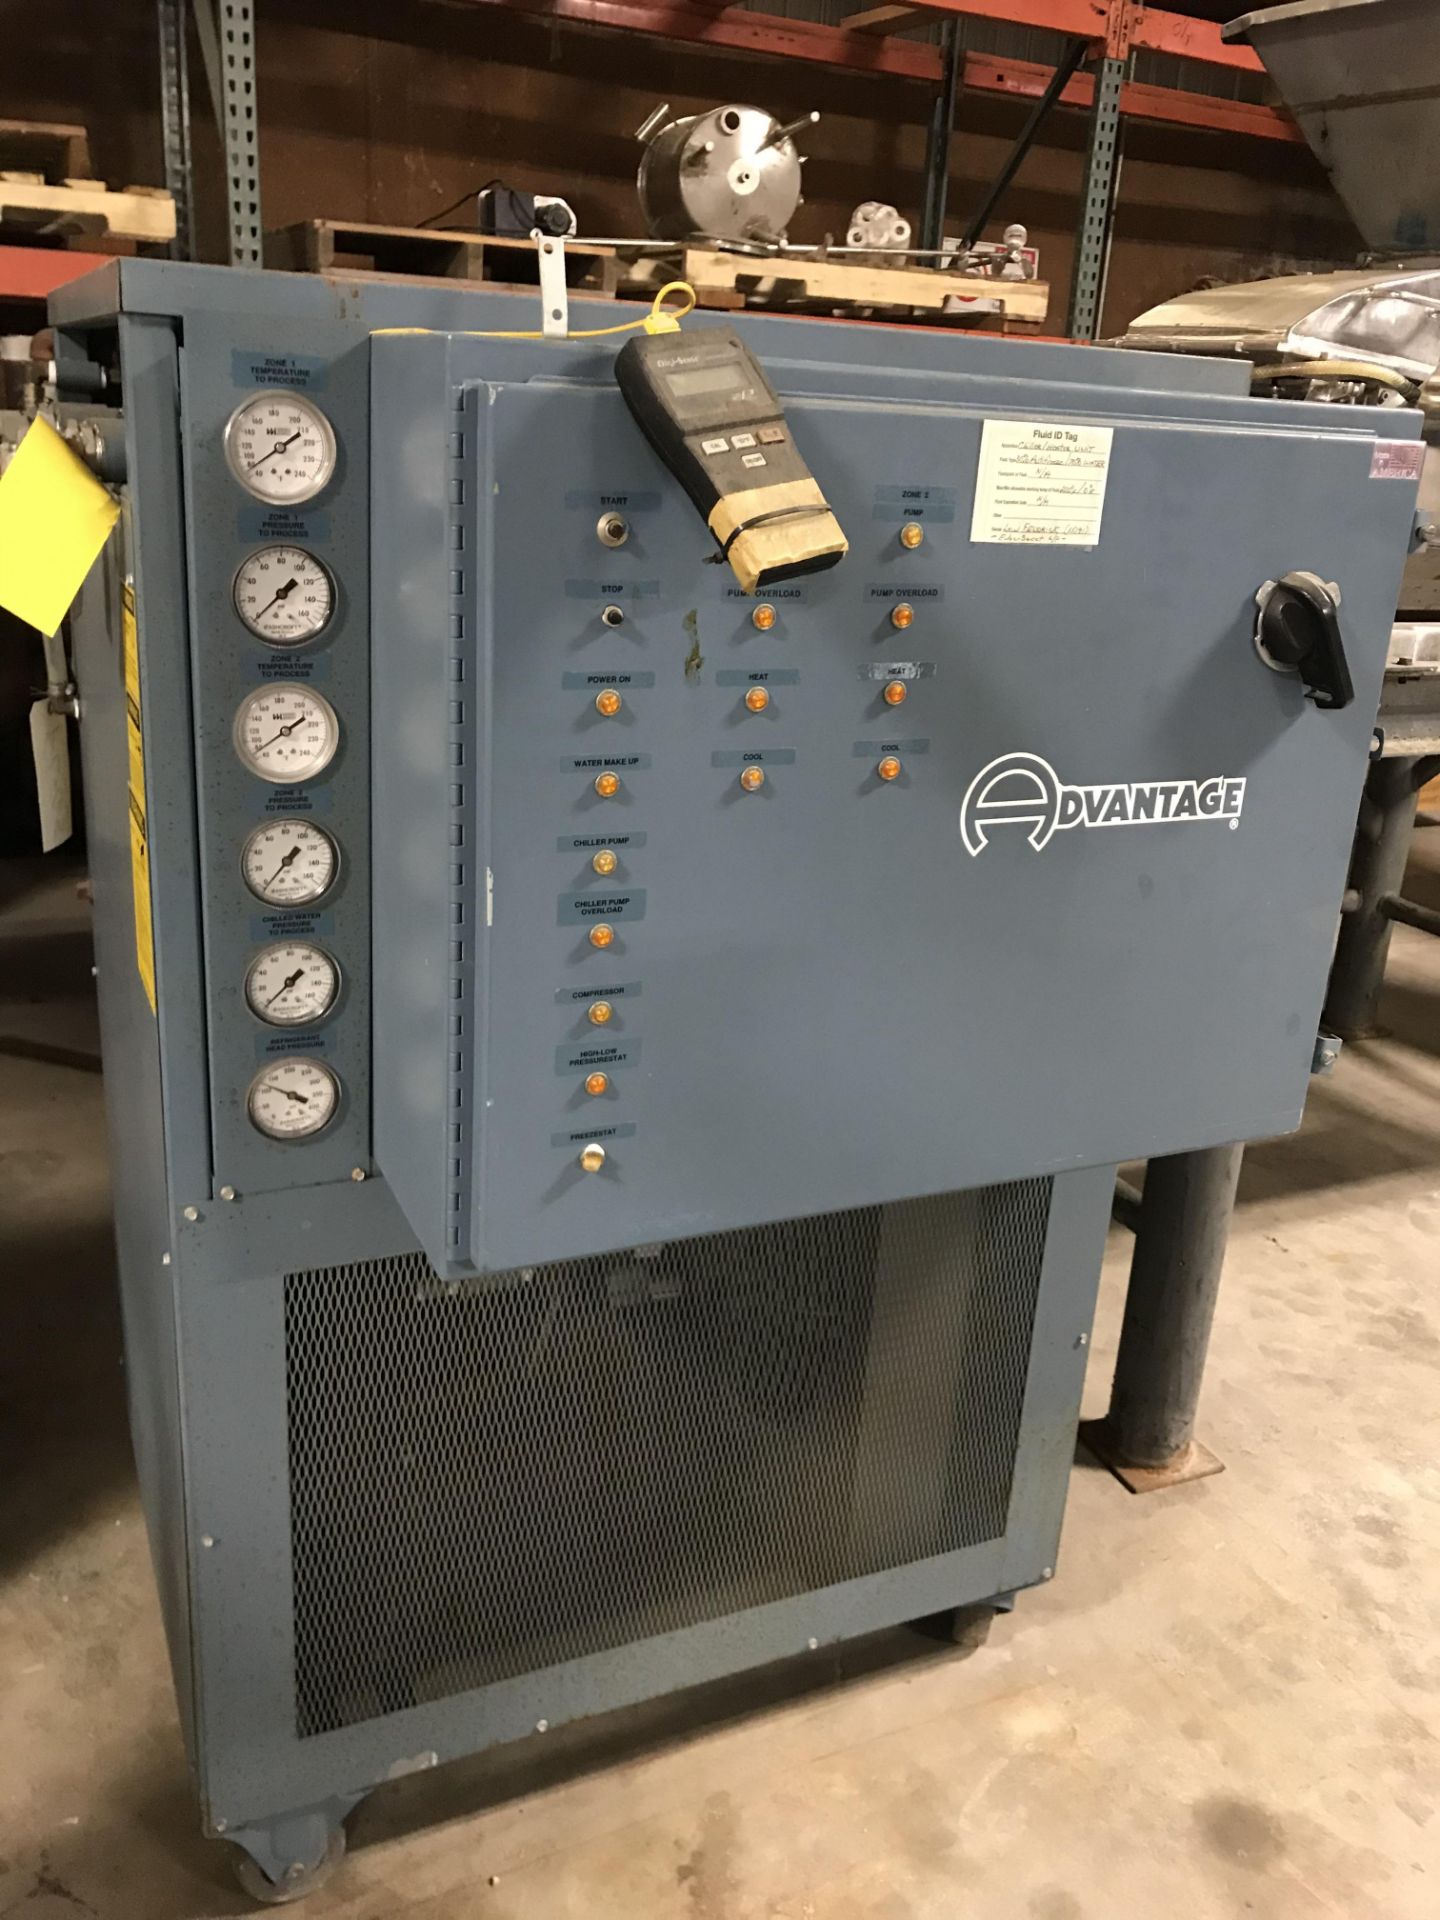 Used Advantage Chiller, Model RC-2AD-635-21HFX, 2 Ton Capacity, Media Glycol/Water, Rated 100 psi,